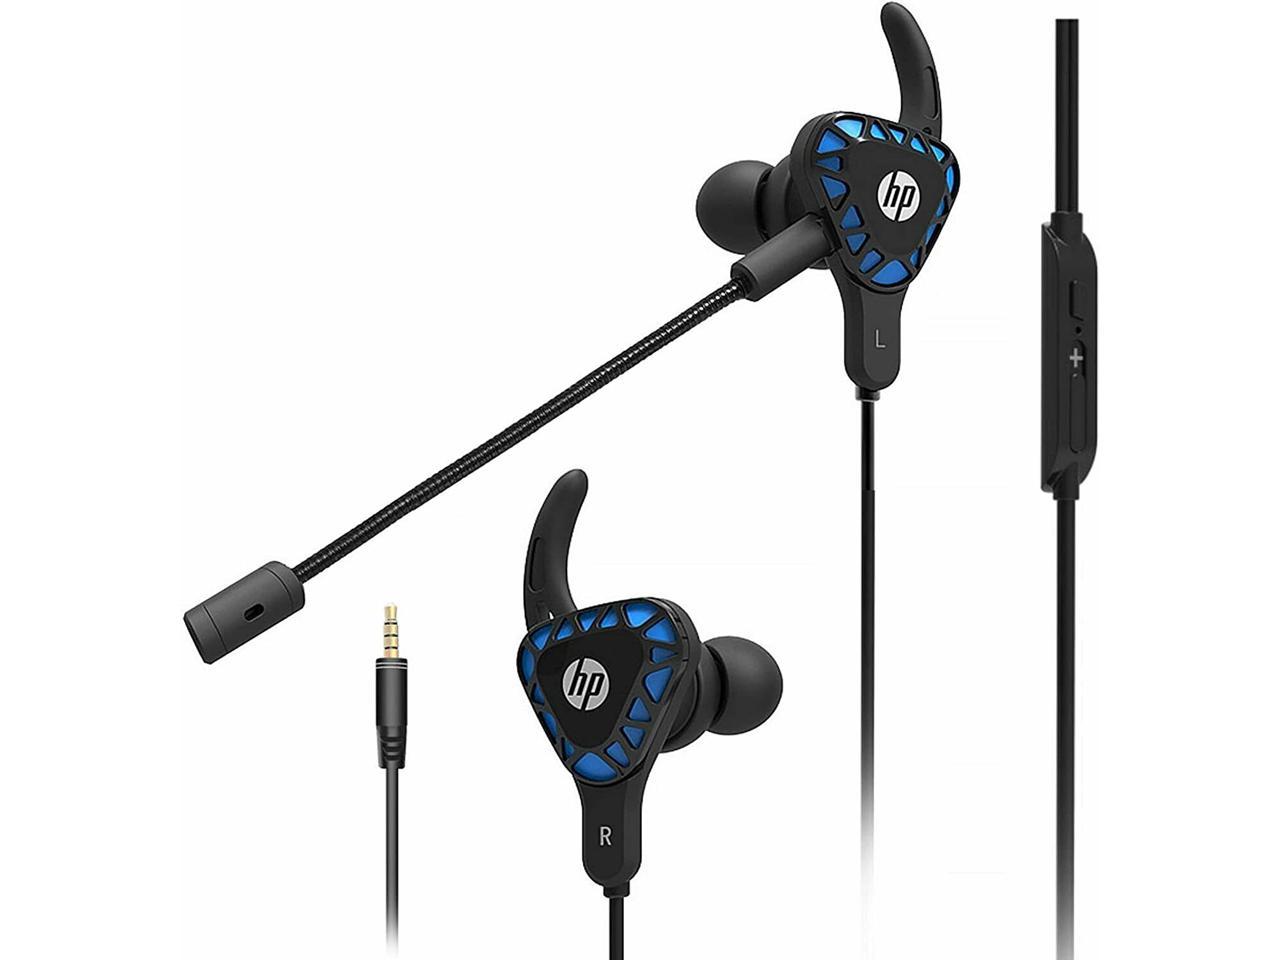 earbud headset for xbox one